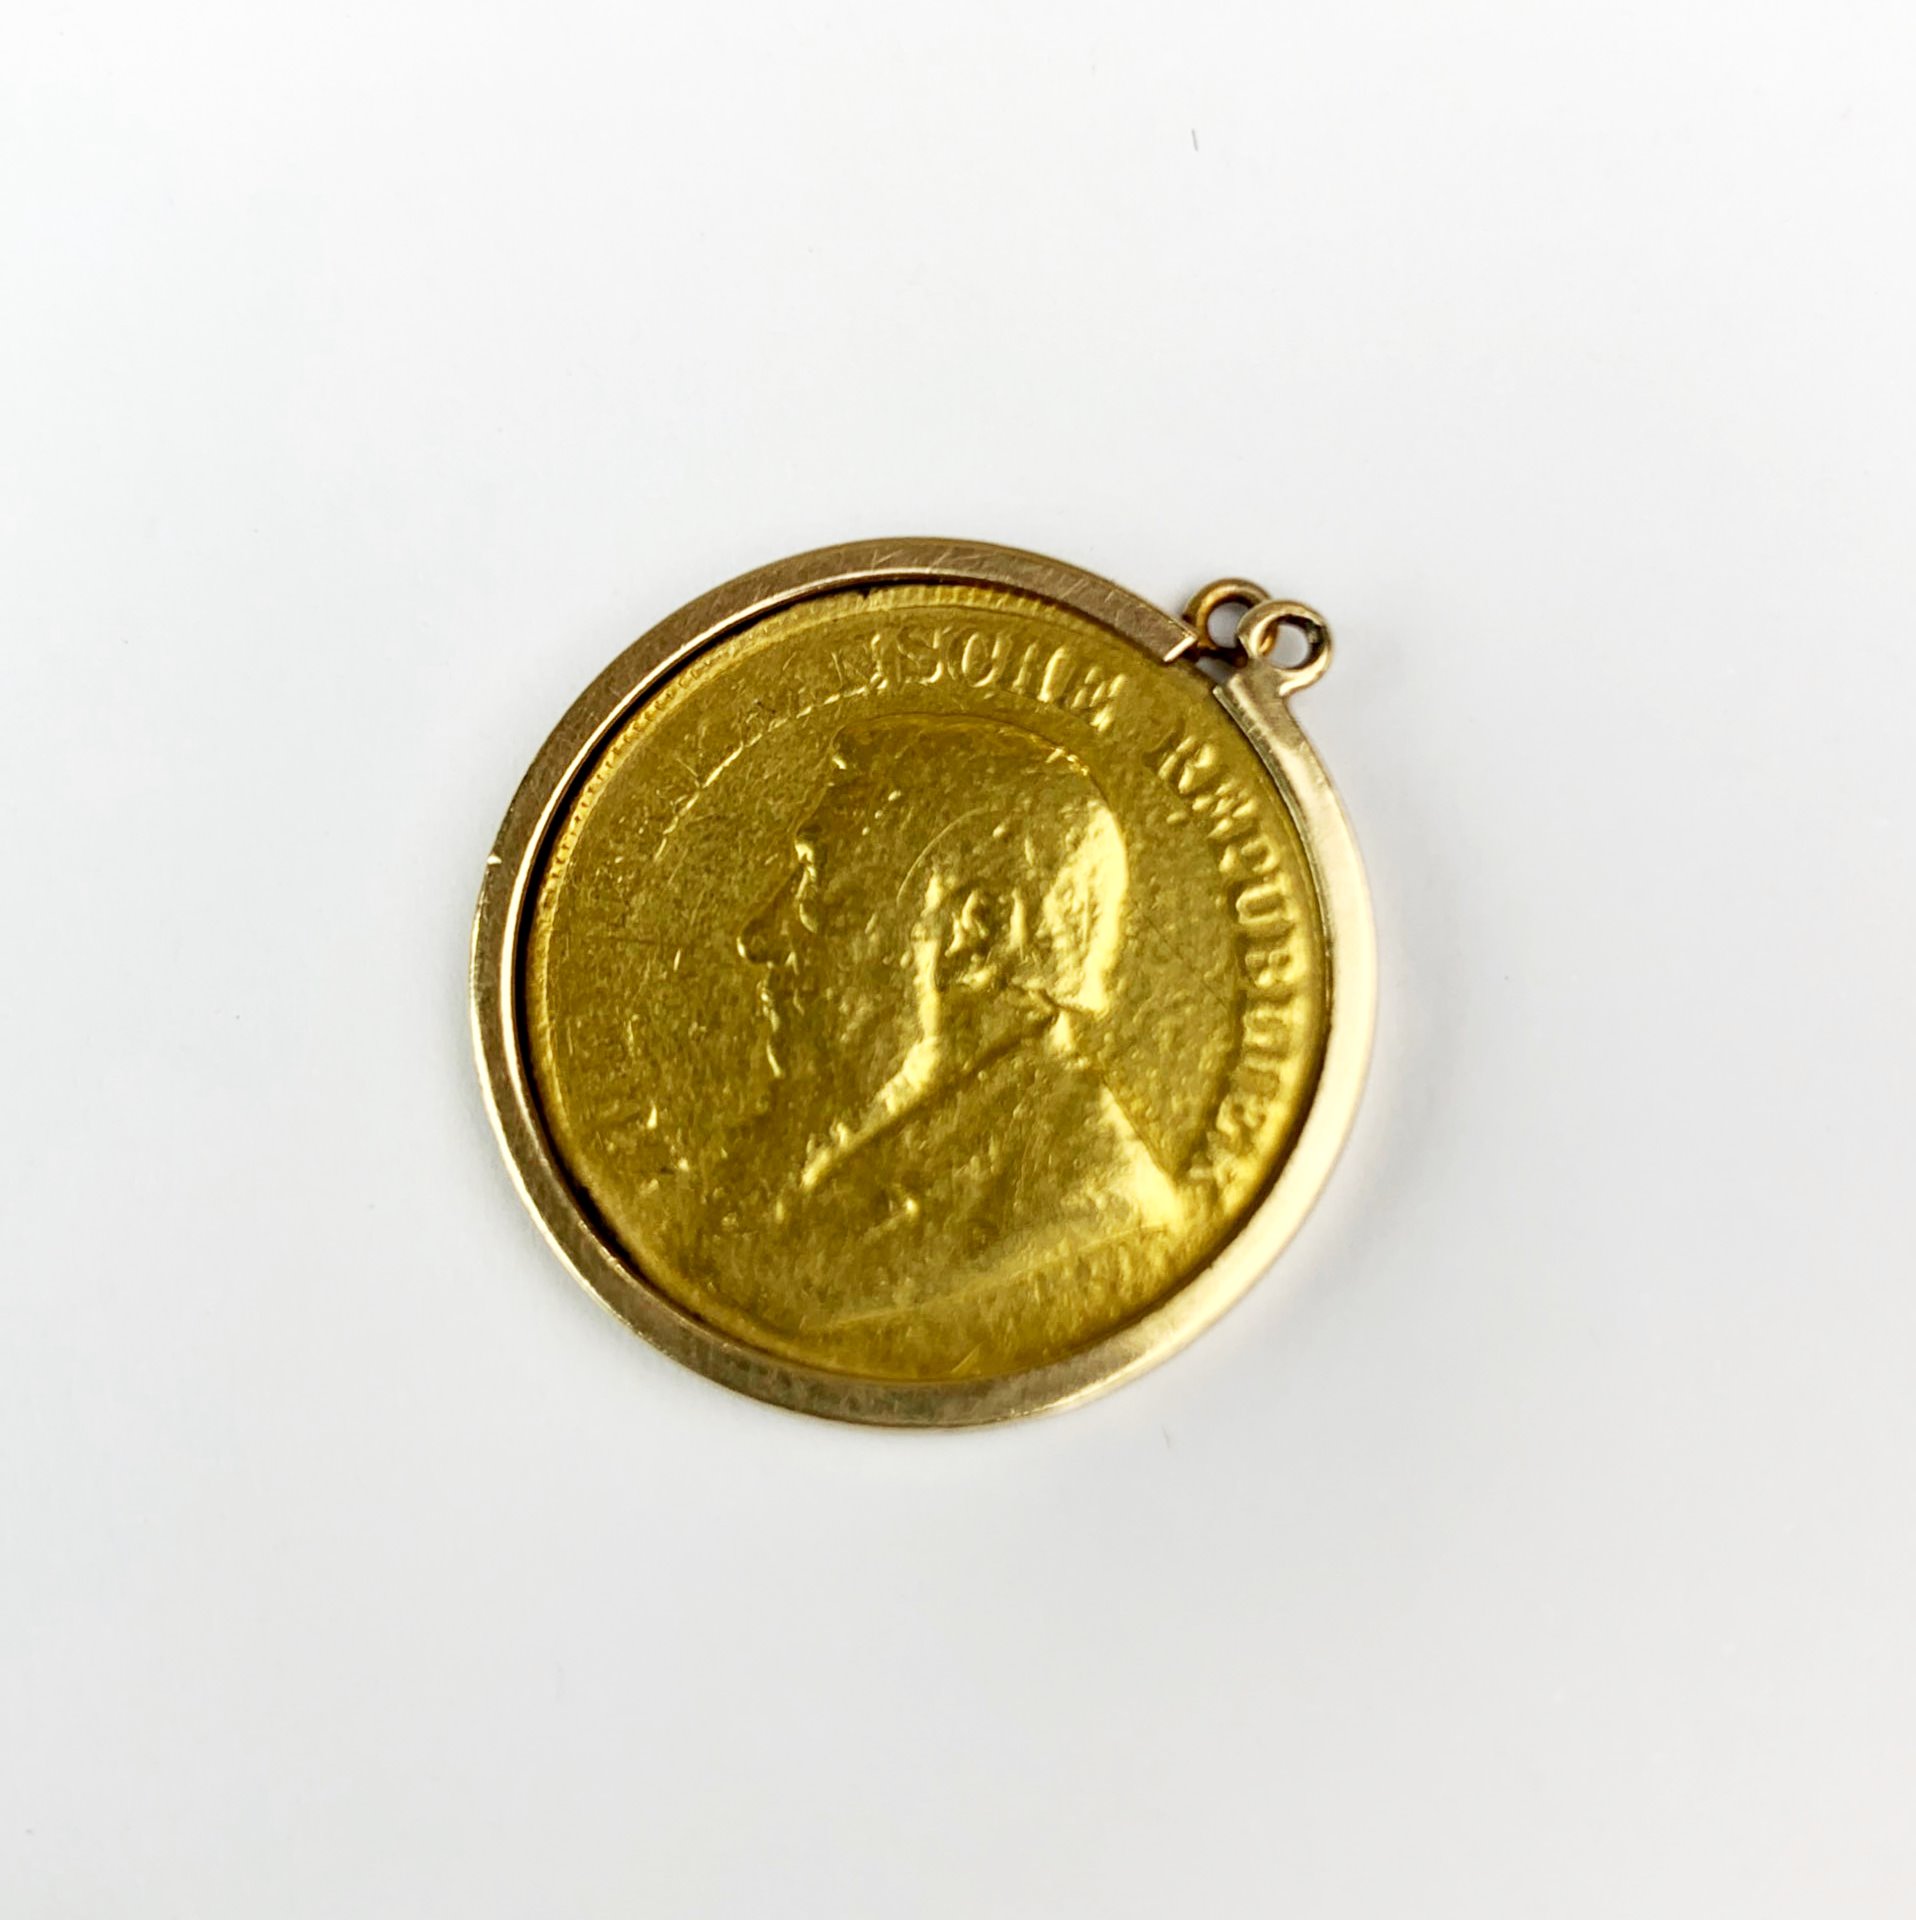 An 1893 South African gold £1 coin with 9ct gold mount. - Image 3 of 3